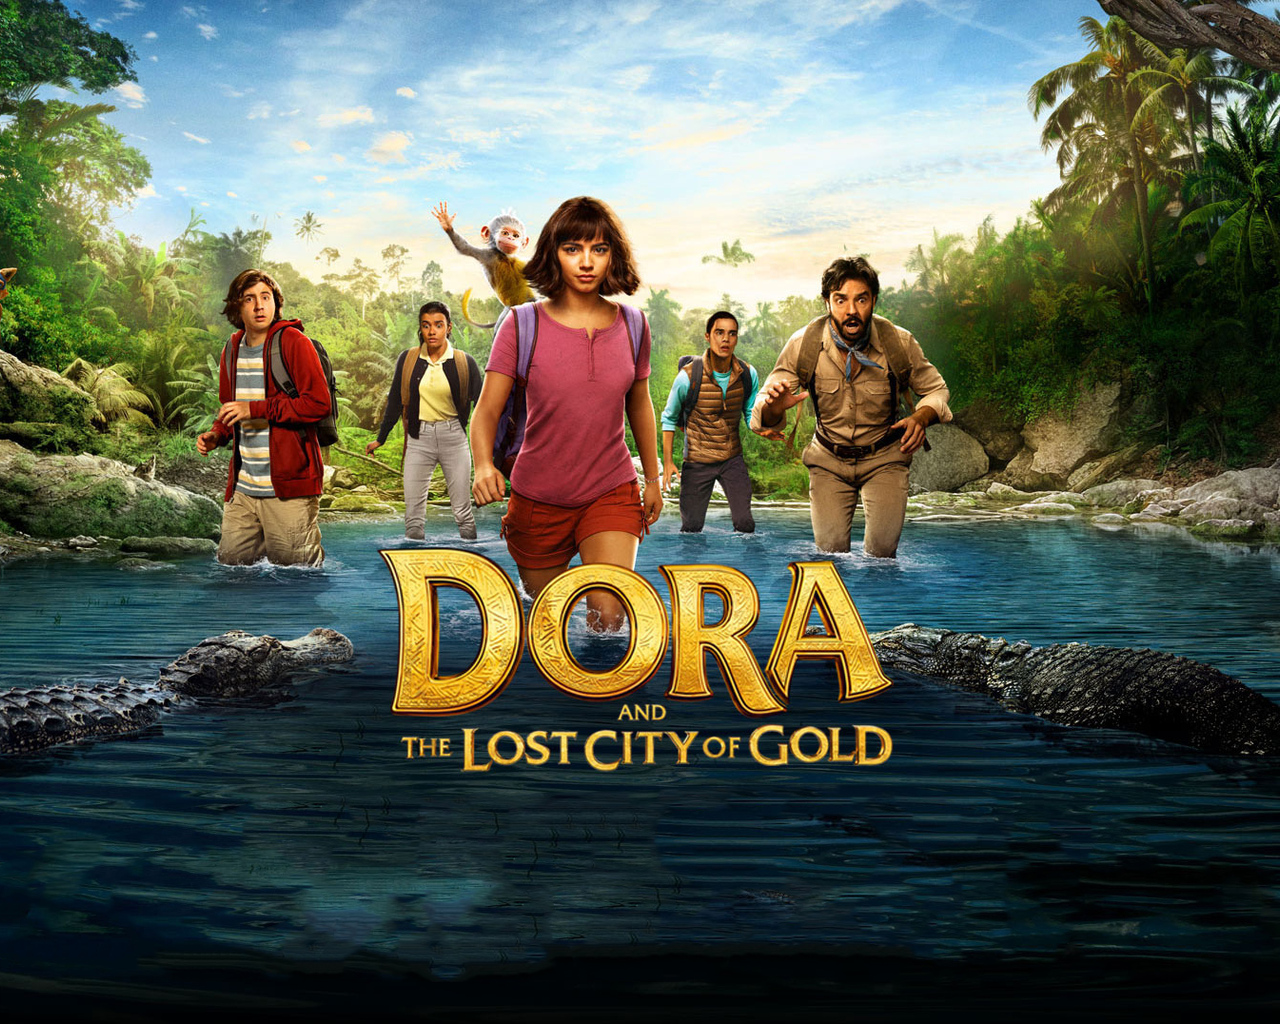 Download Dora And The Lost City Of Gold 2019 Full Hd Quality